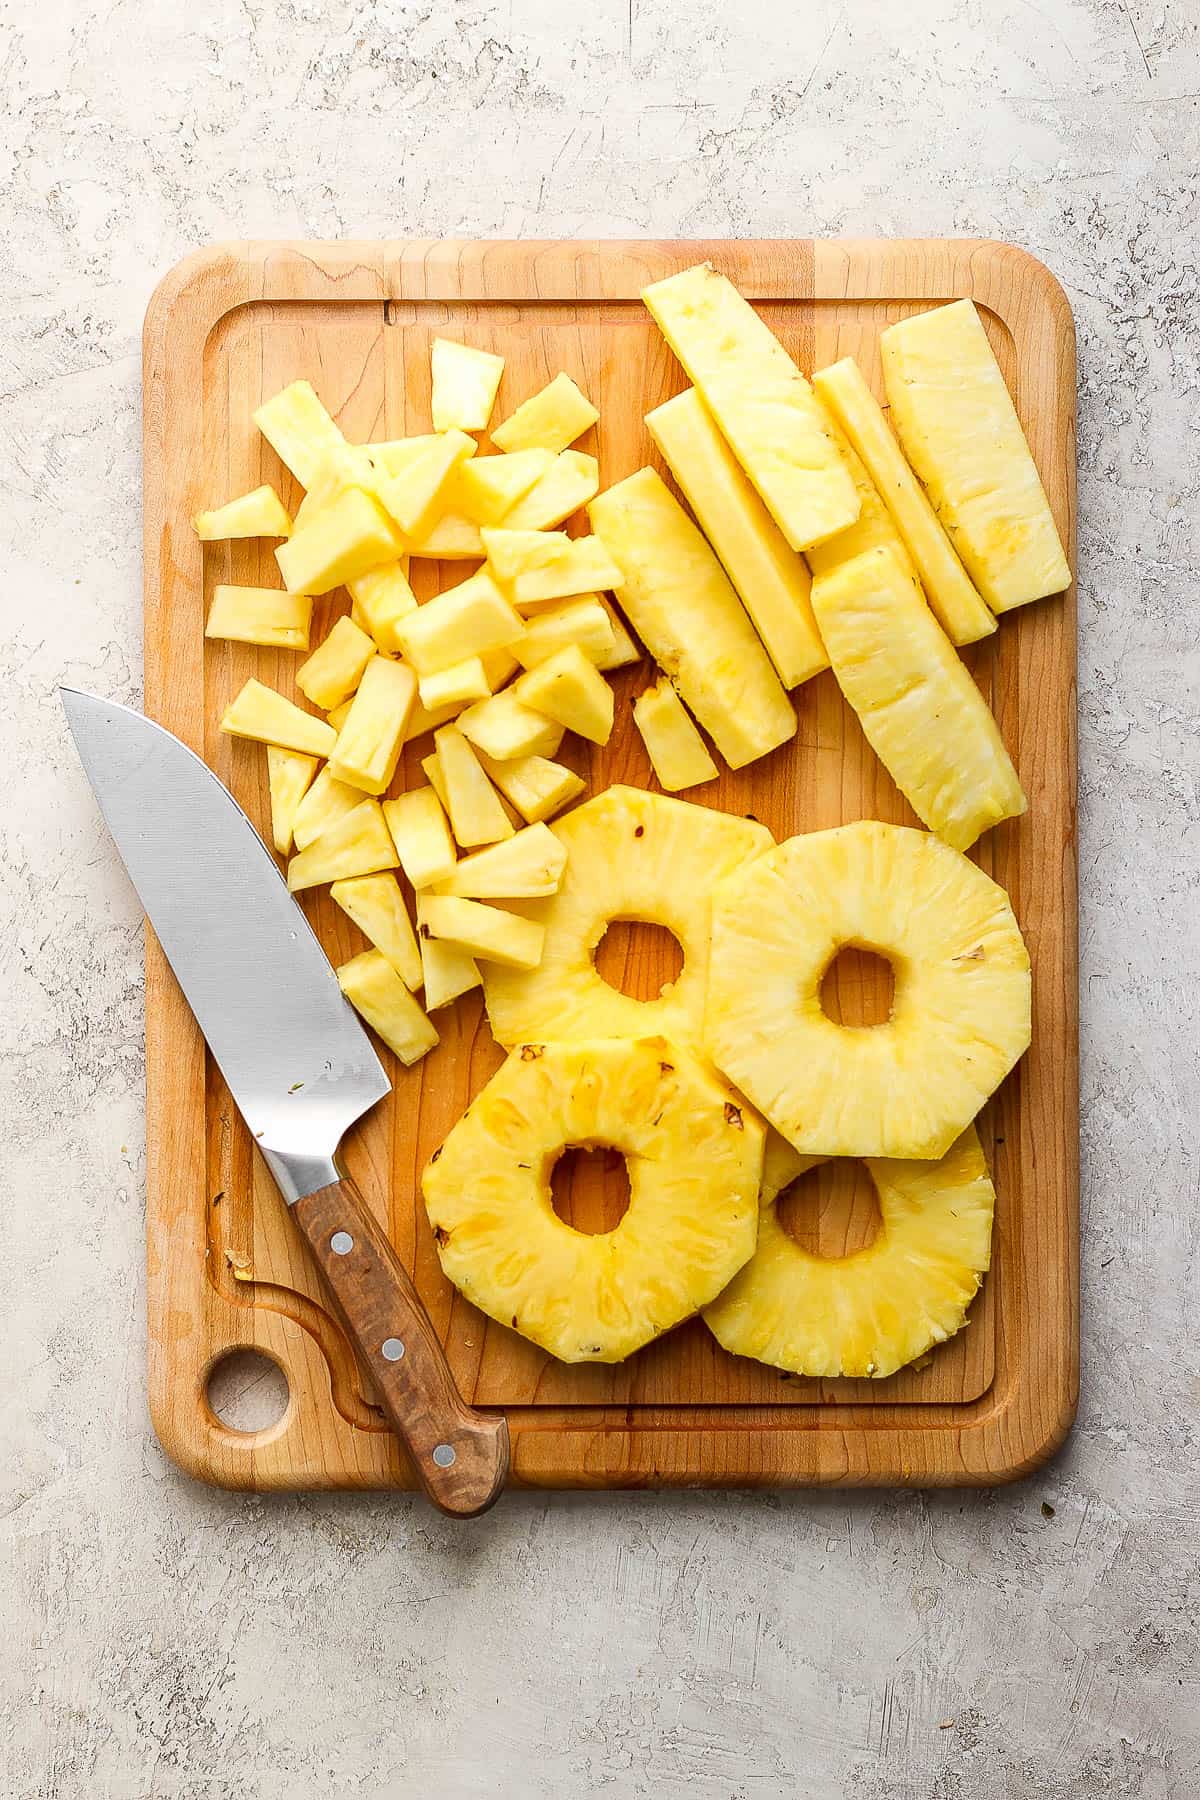 A wooden cutting board with pineapple rounds, strips, and chunks.